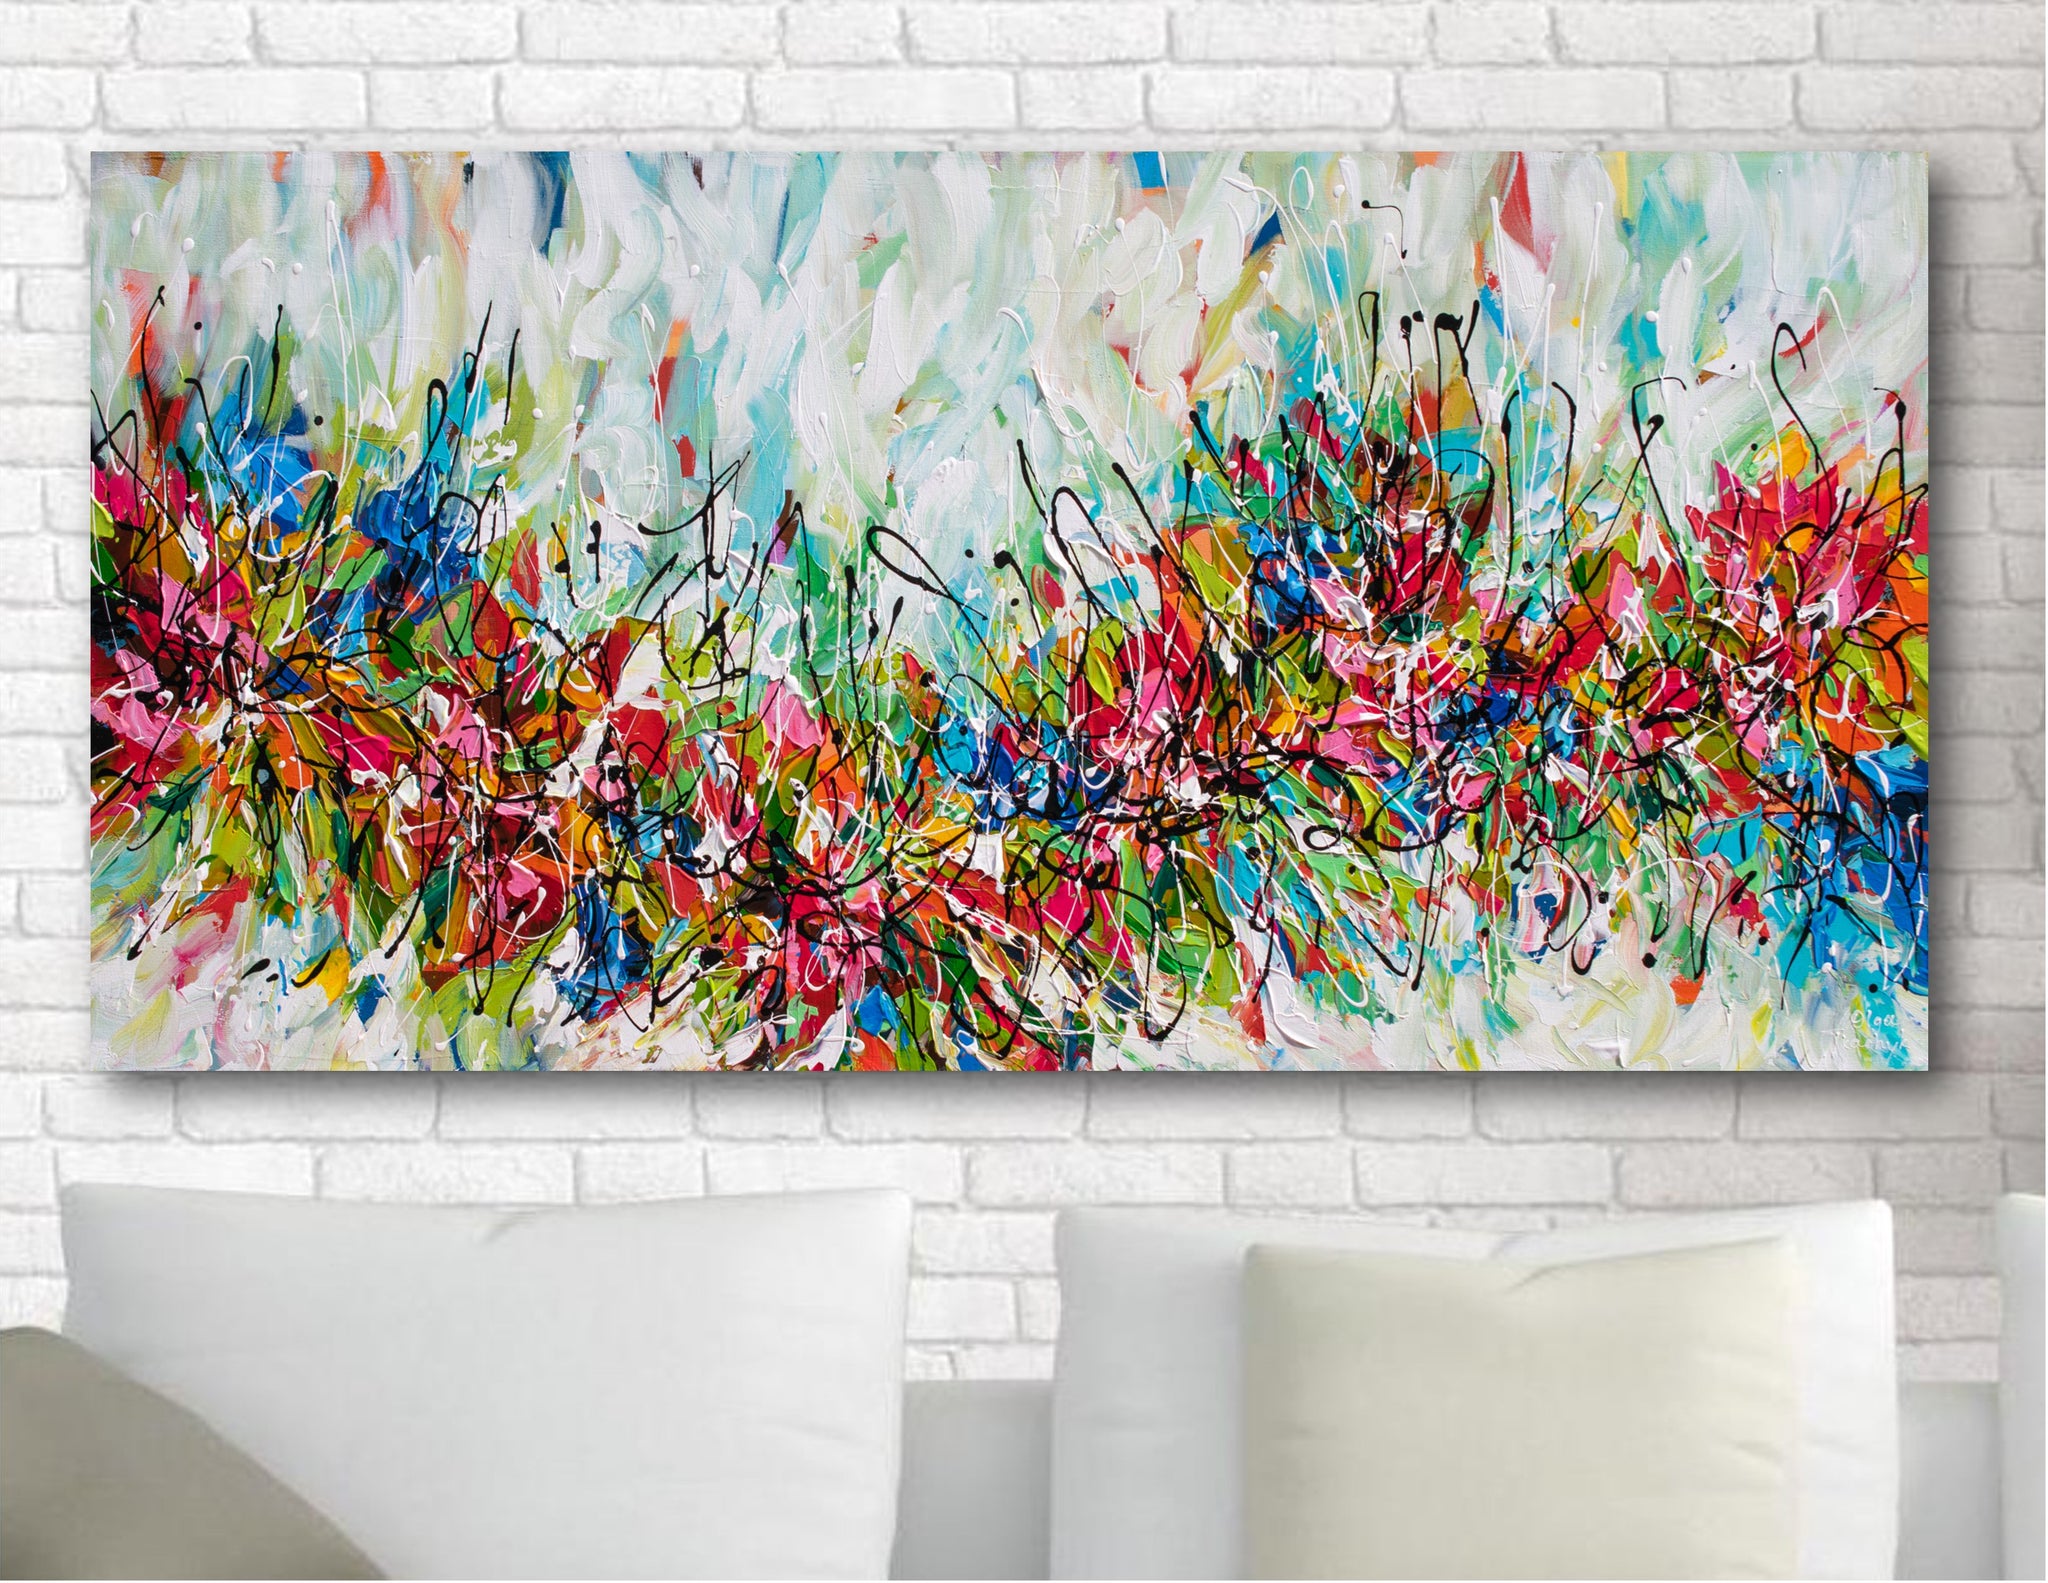 Better Days - Abstract Acrylic Painting, Palette Knife Art, Blue Brown Wall  Art Canvas Acrylic painting by Olga Tkachyk